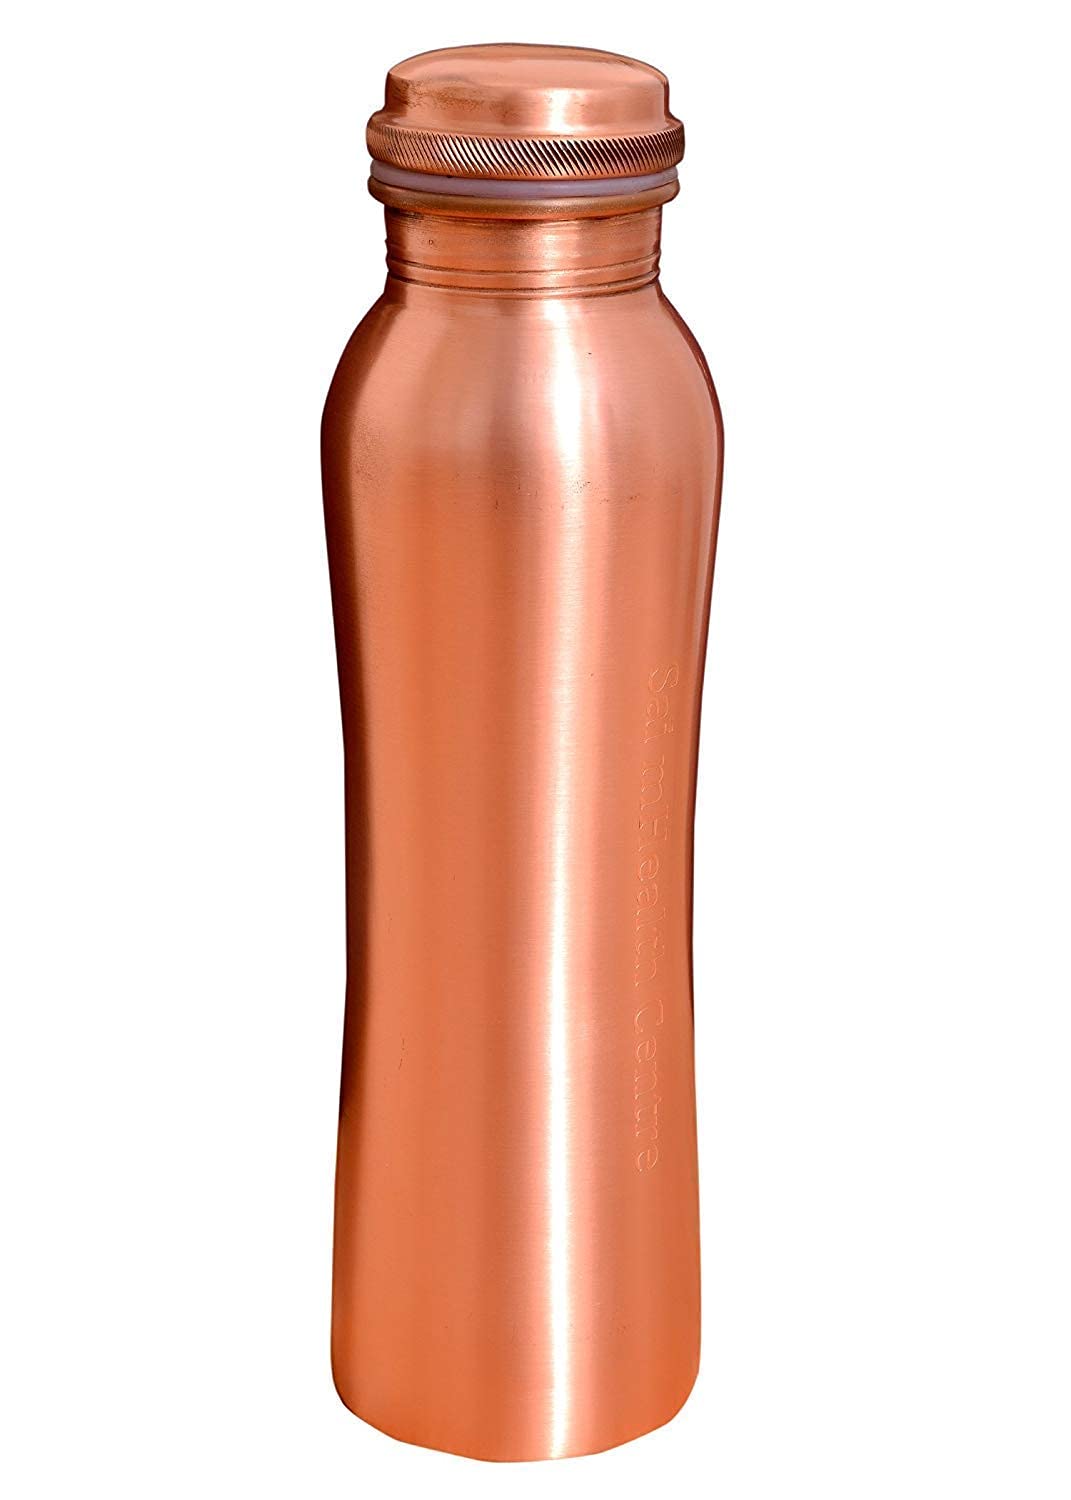 Rudra Exports Pure Copper Water Bottle and Curve Design Copper Water Bottle 1 Litre (Set of 2)